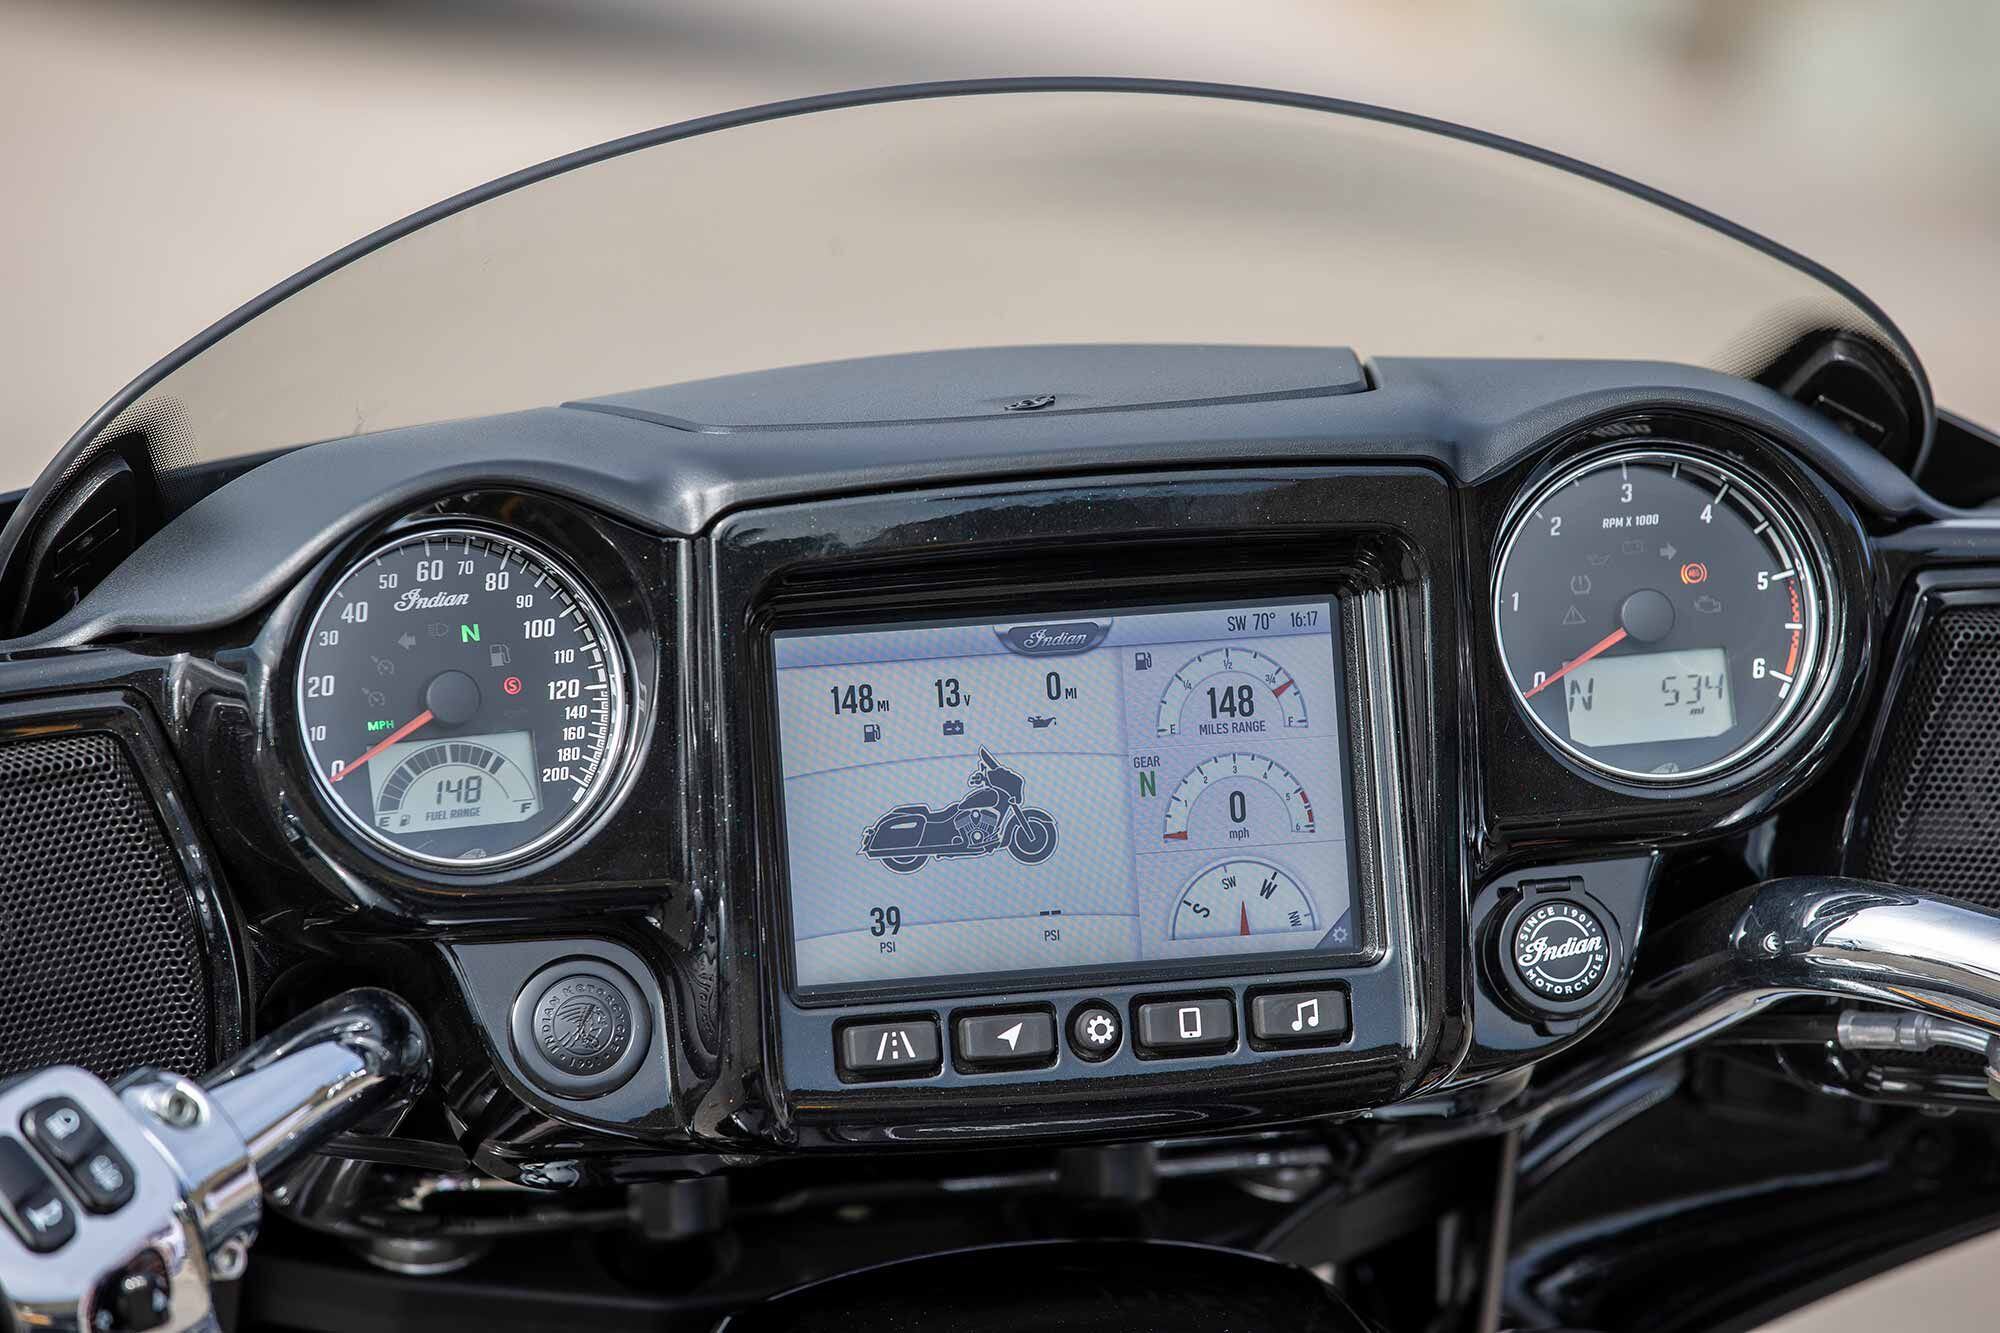 Gauges and touchscreen on the 2021 Indian Chieftain Limited.